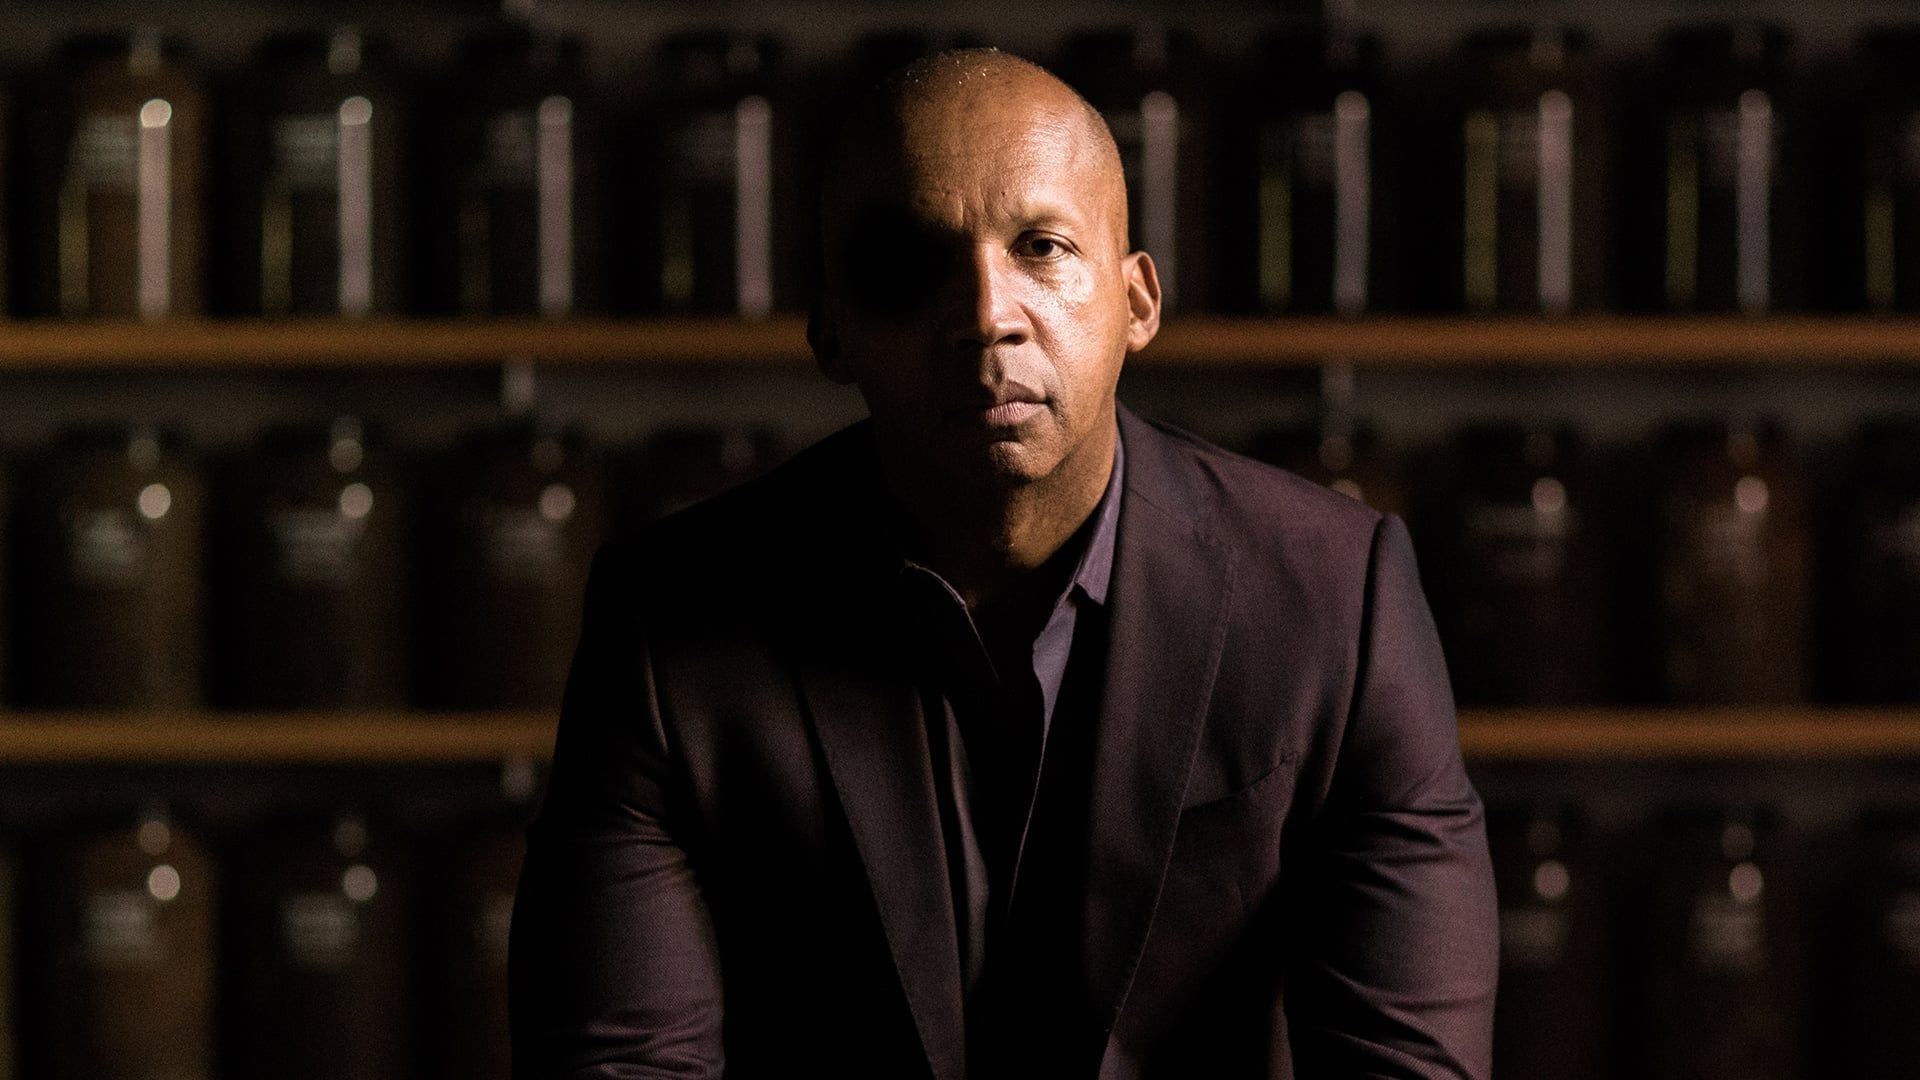 True Justice: Bryan Stevenson's Fight for Equality Backdrop